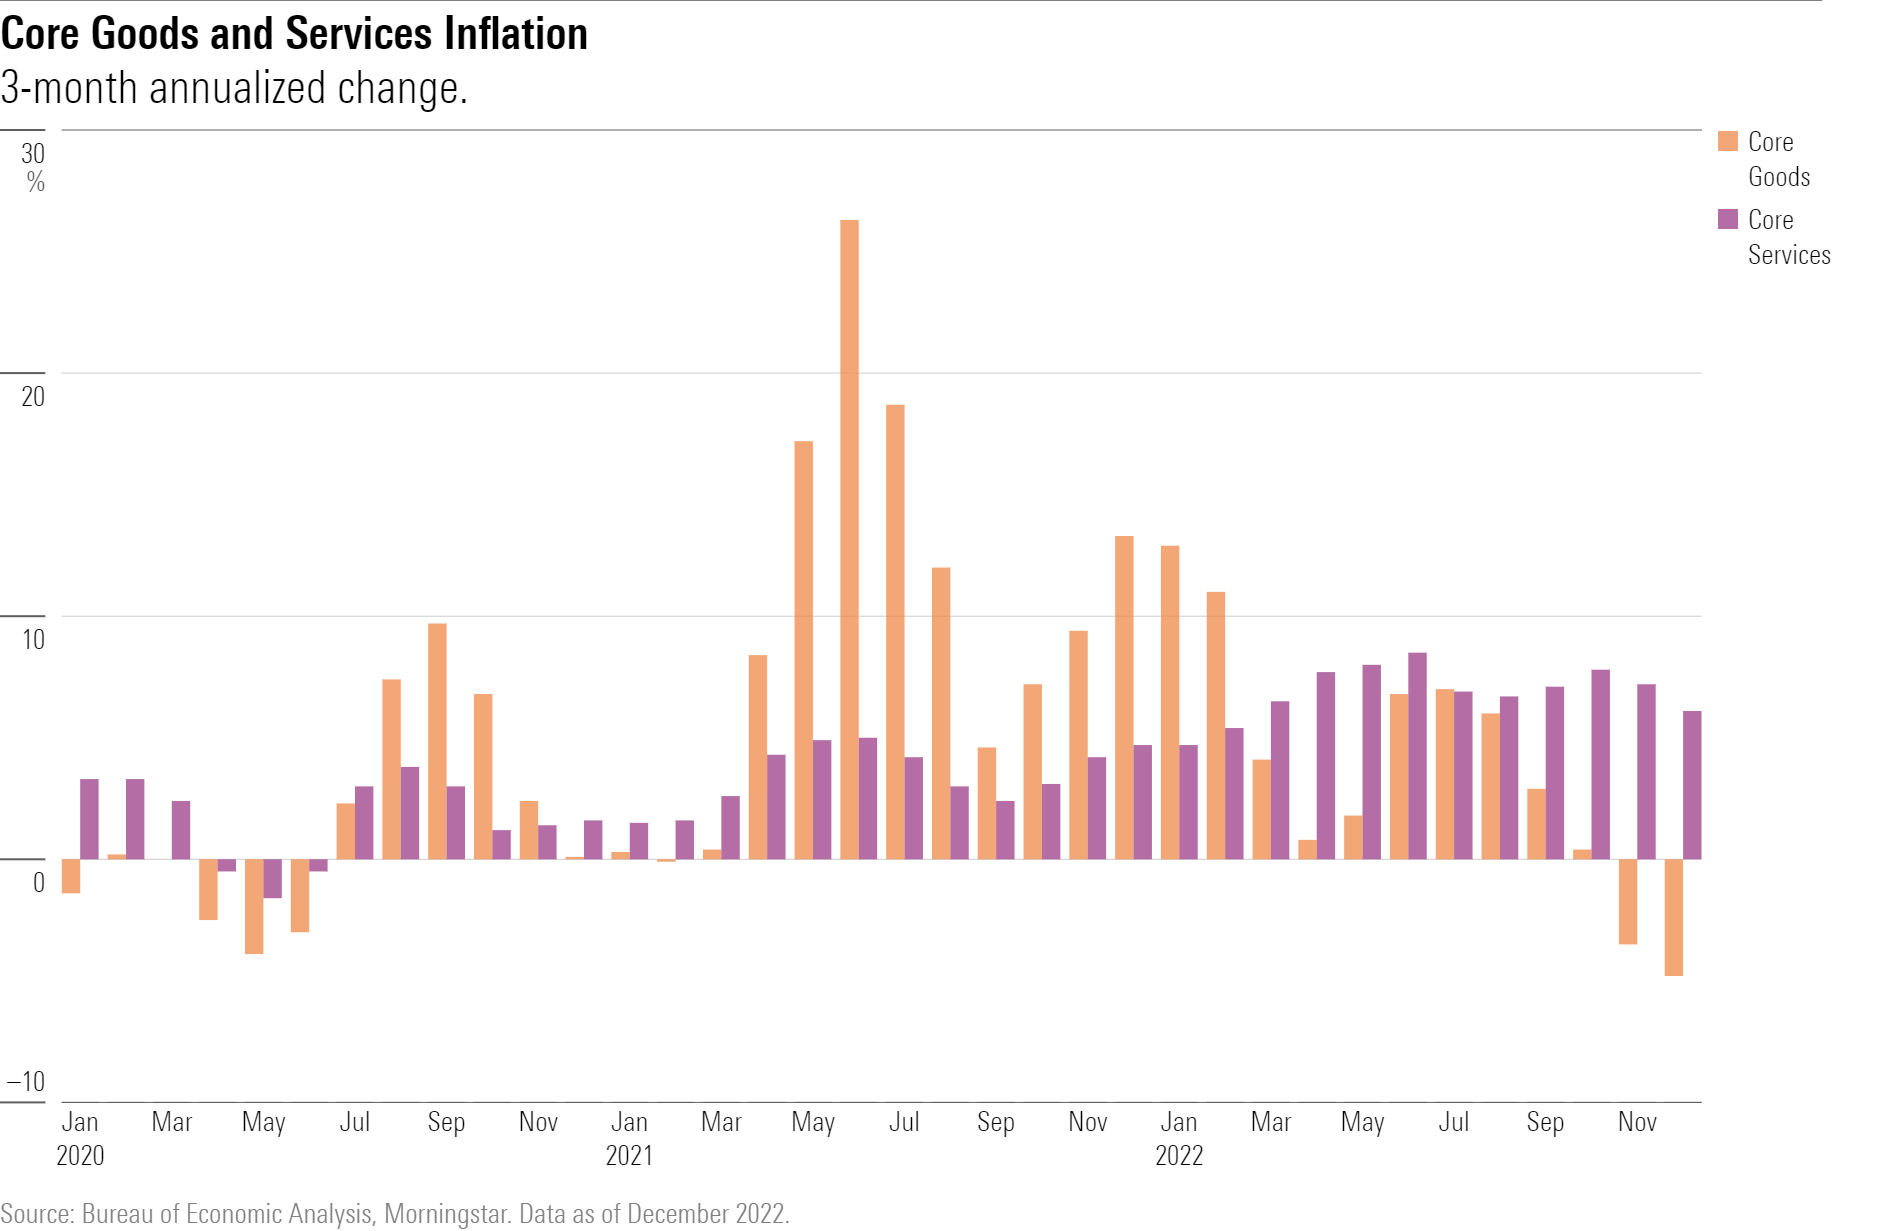 Core goods inflation vs. core services inflation shown as 3-month annualized change.